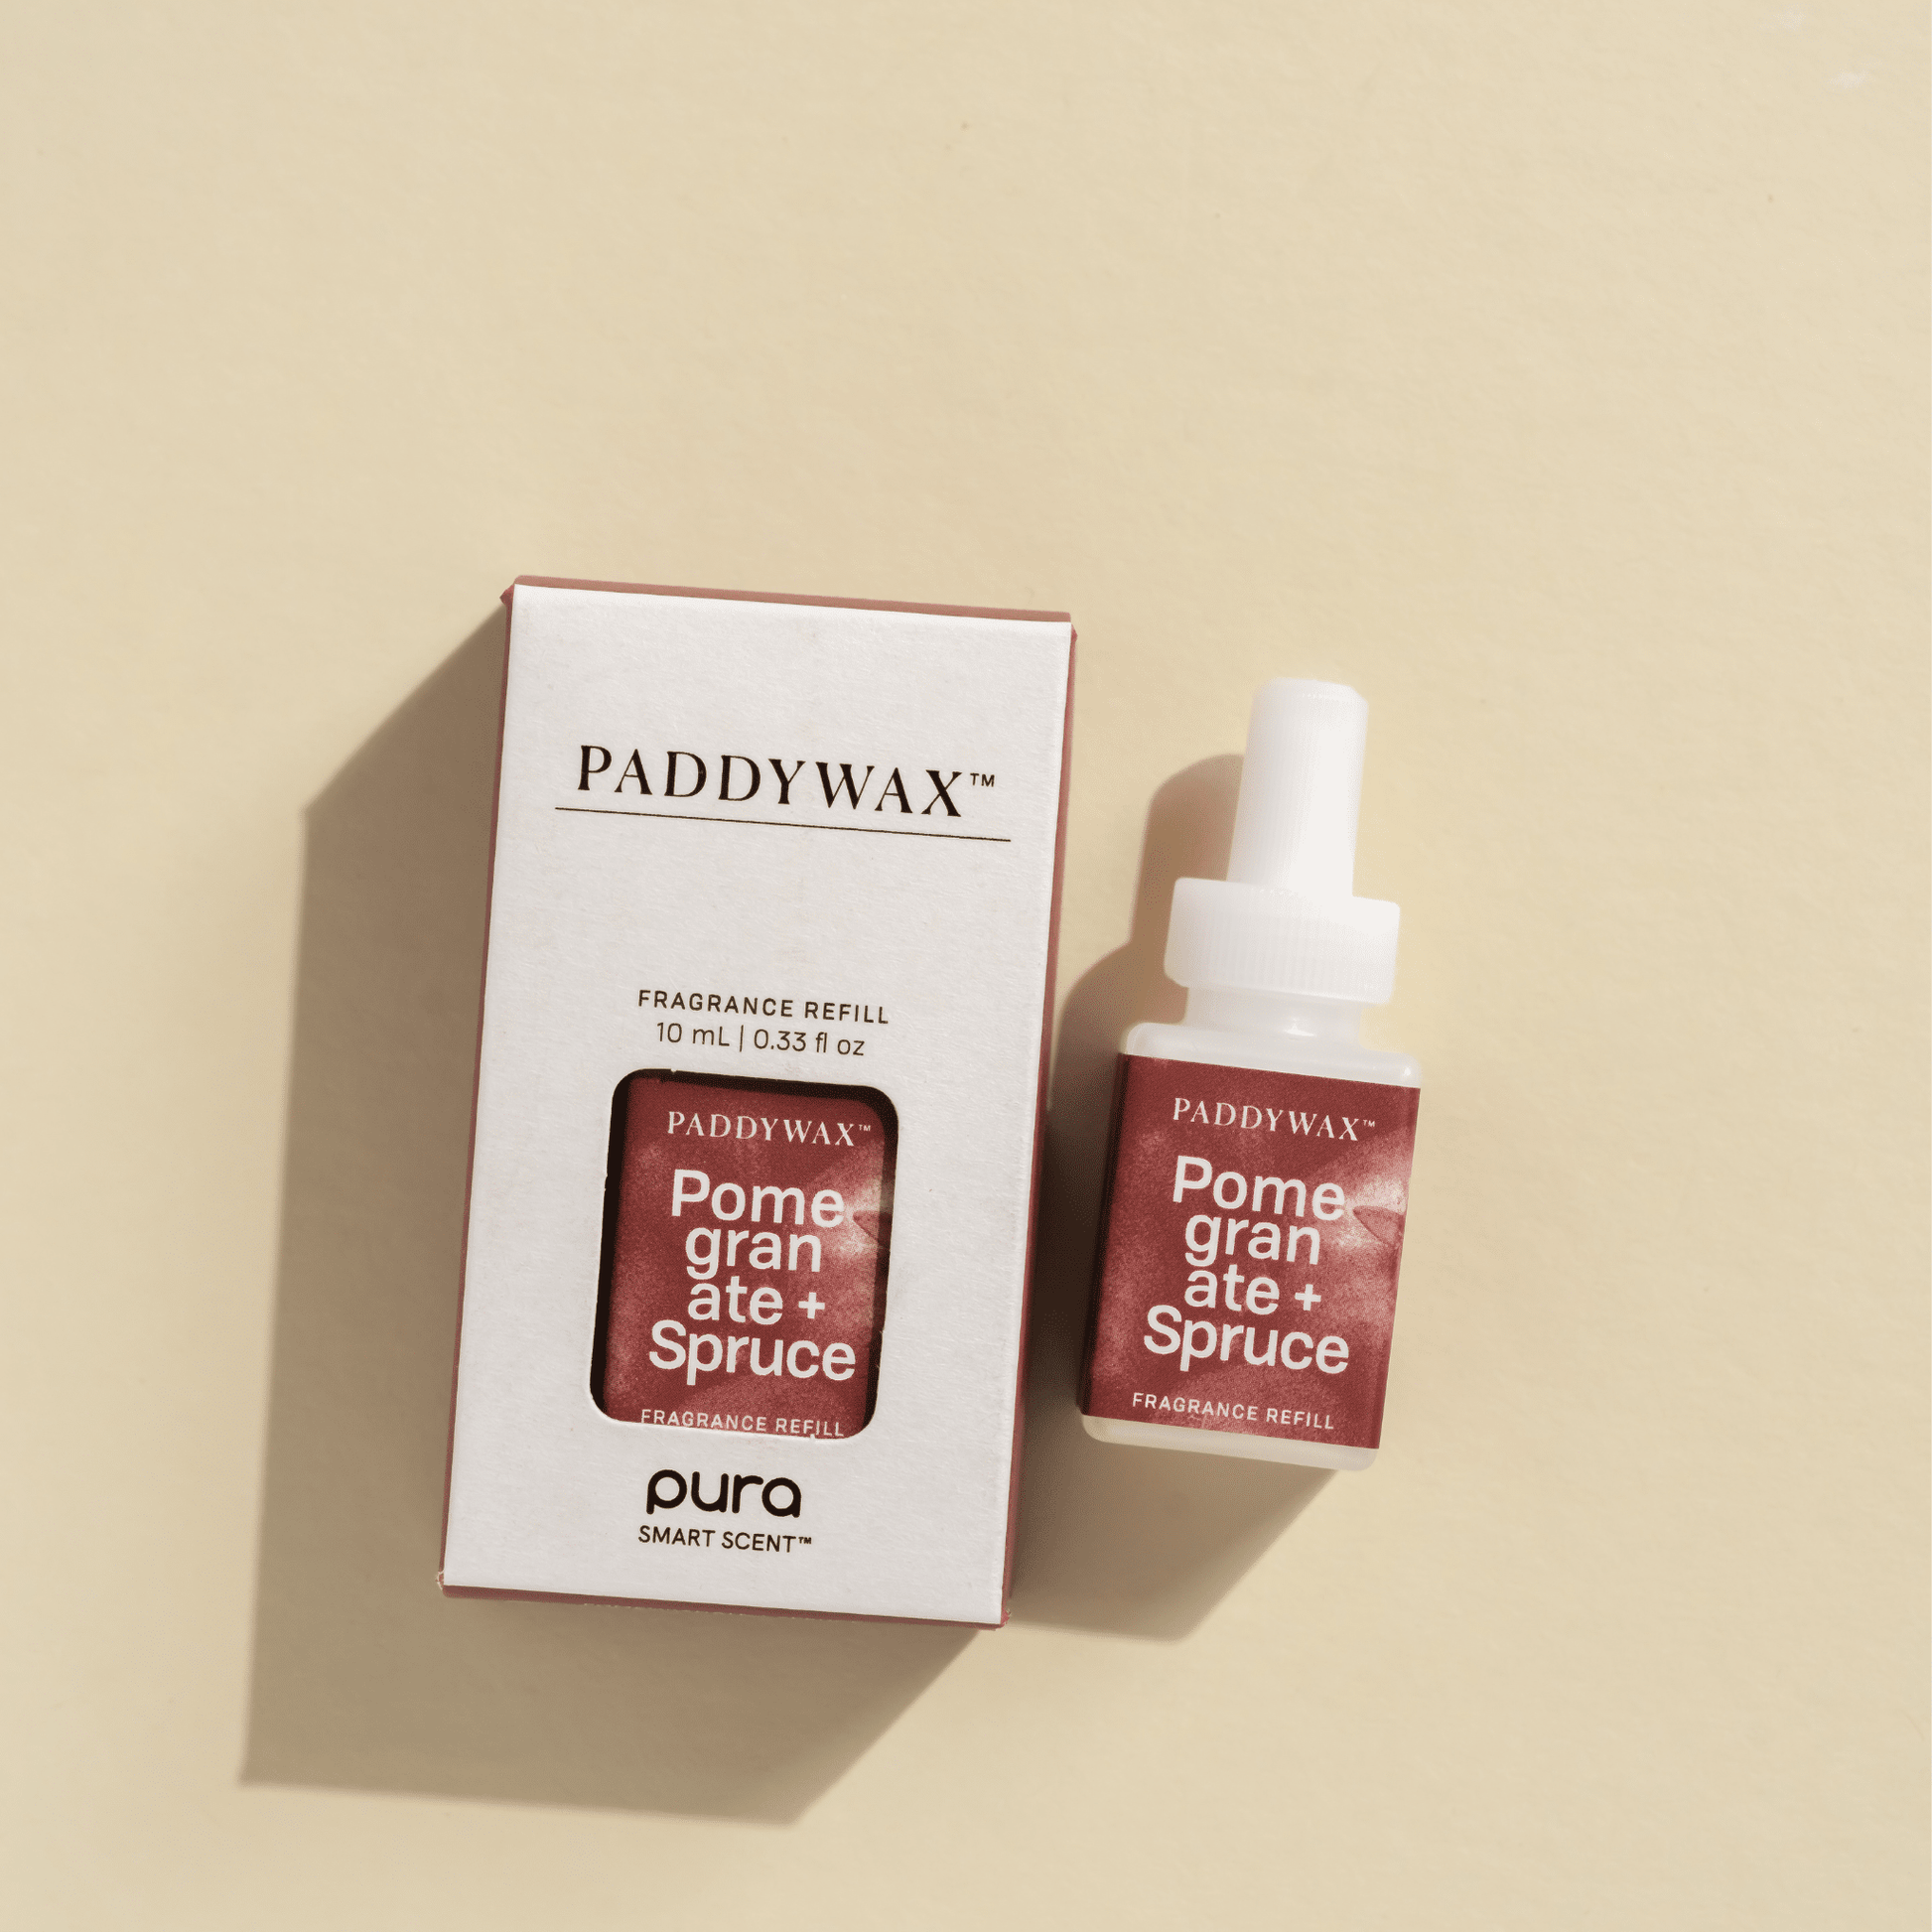 Paddywax Pomegranate and Spruce Pura fragrance refills laying on pale surface